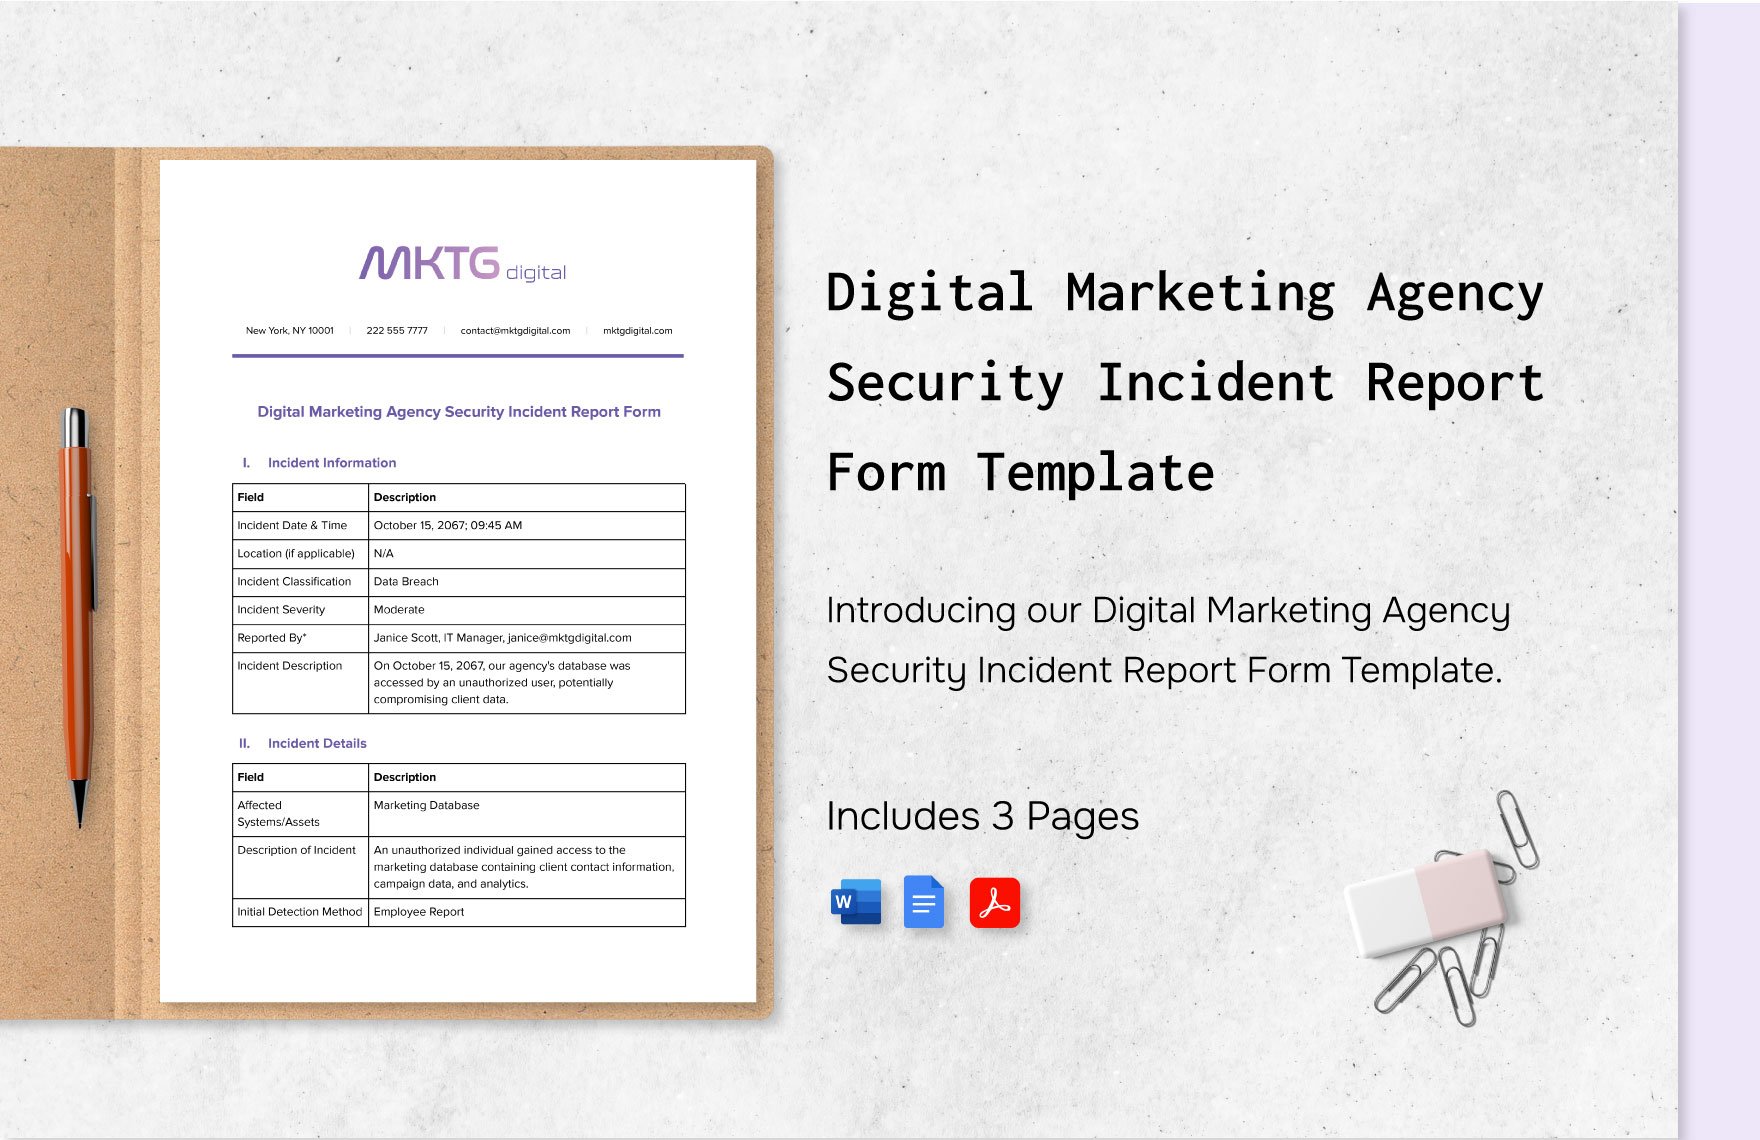 Digital Marketing Agency Security Incident Report Form Template